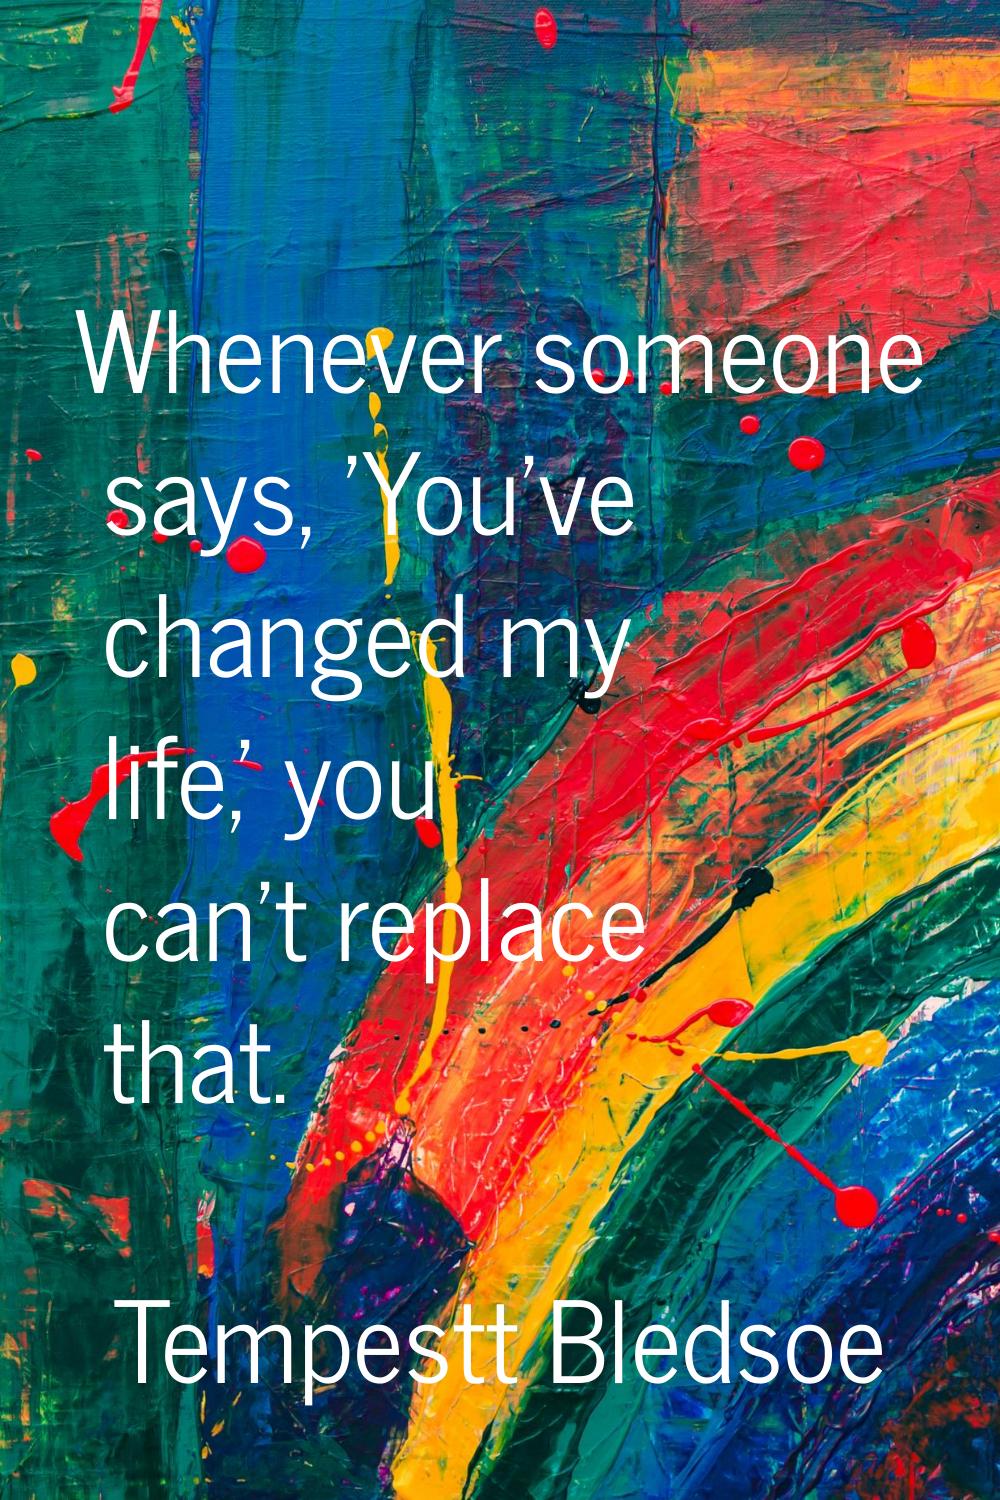 Whenever someone says, 'You've changed my life,' you can't replace that.